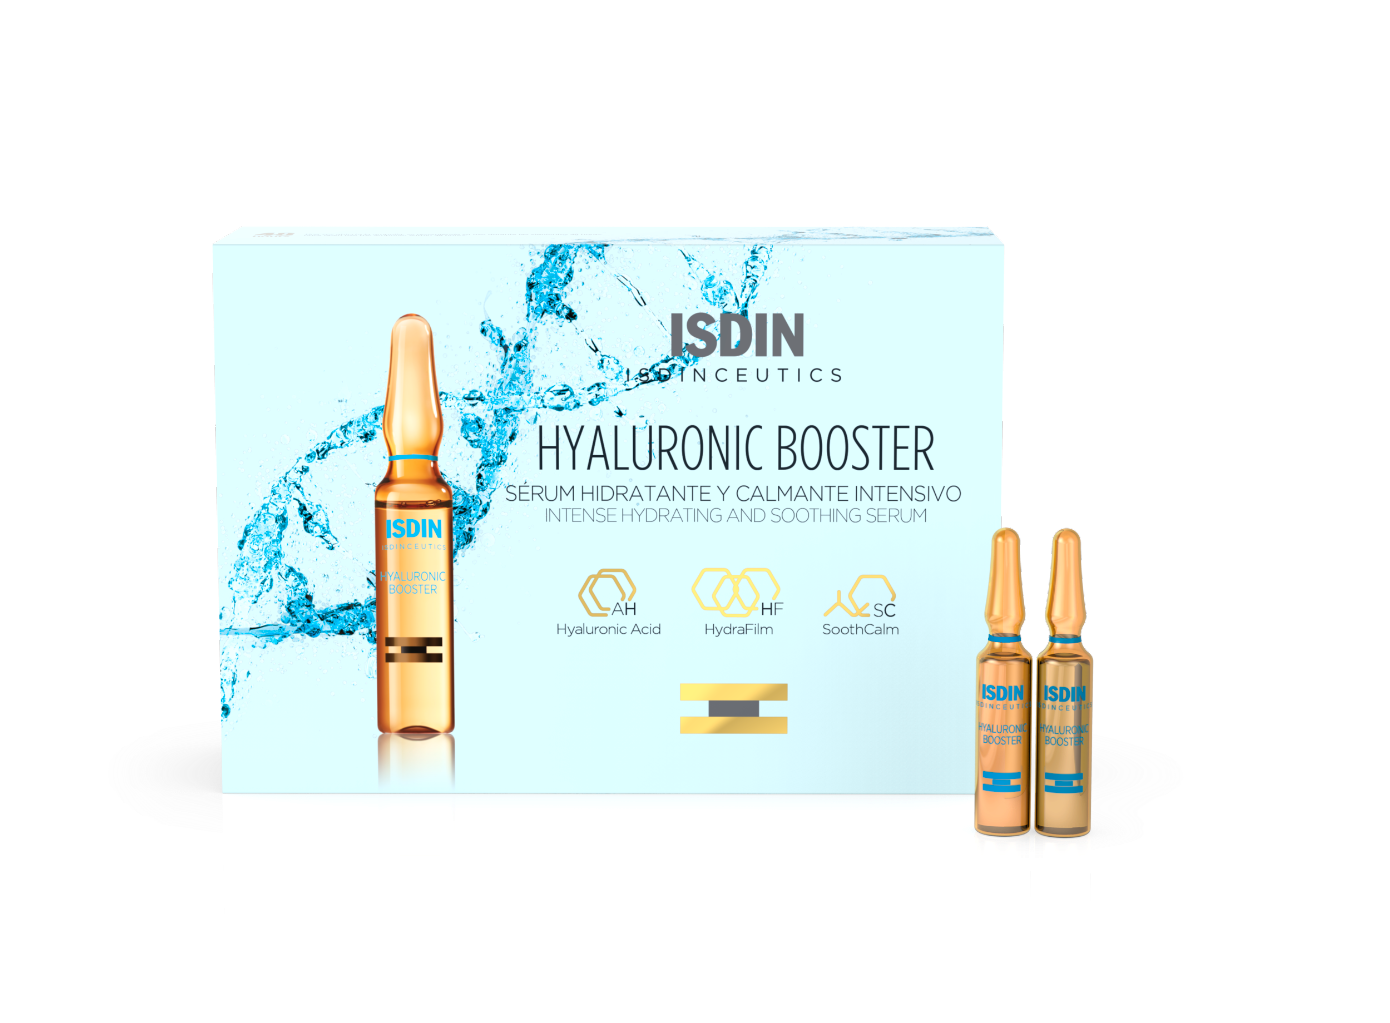 ISDIN Isdinceutics Hyaluronic Booster Intense Hydrating and Soothing Serum Ampoules x5